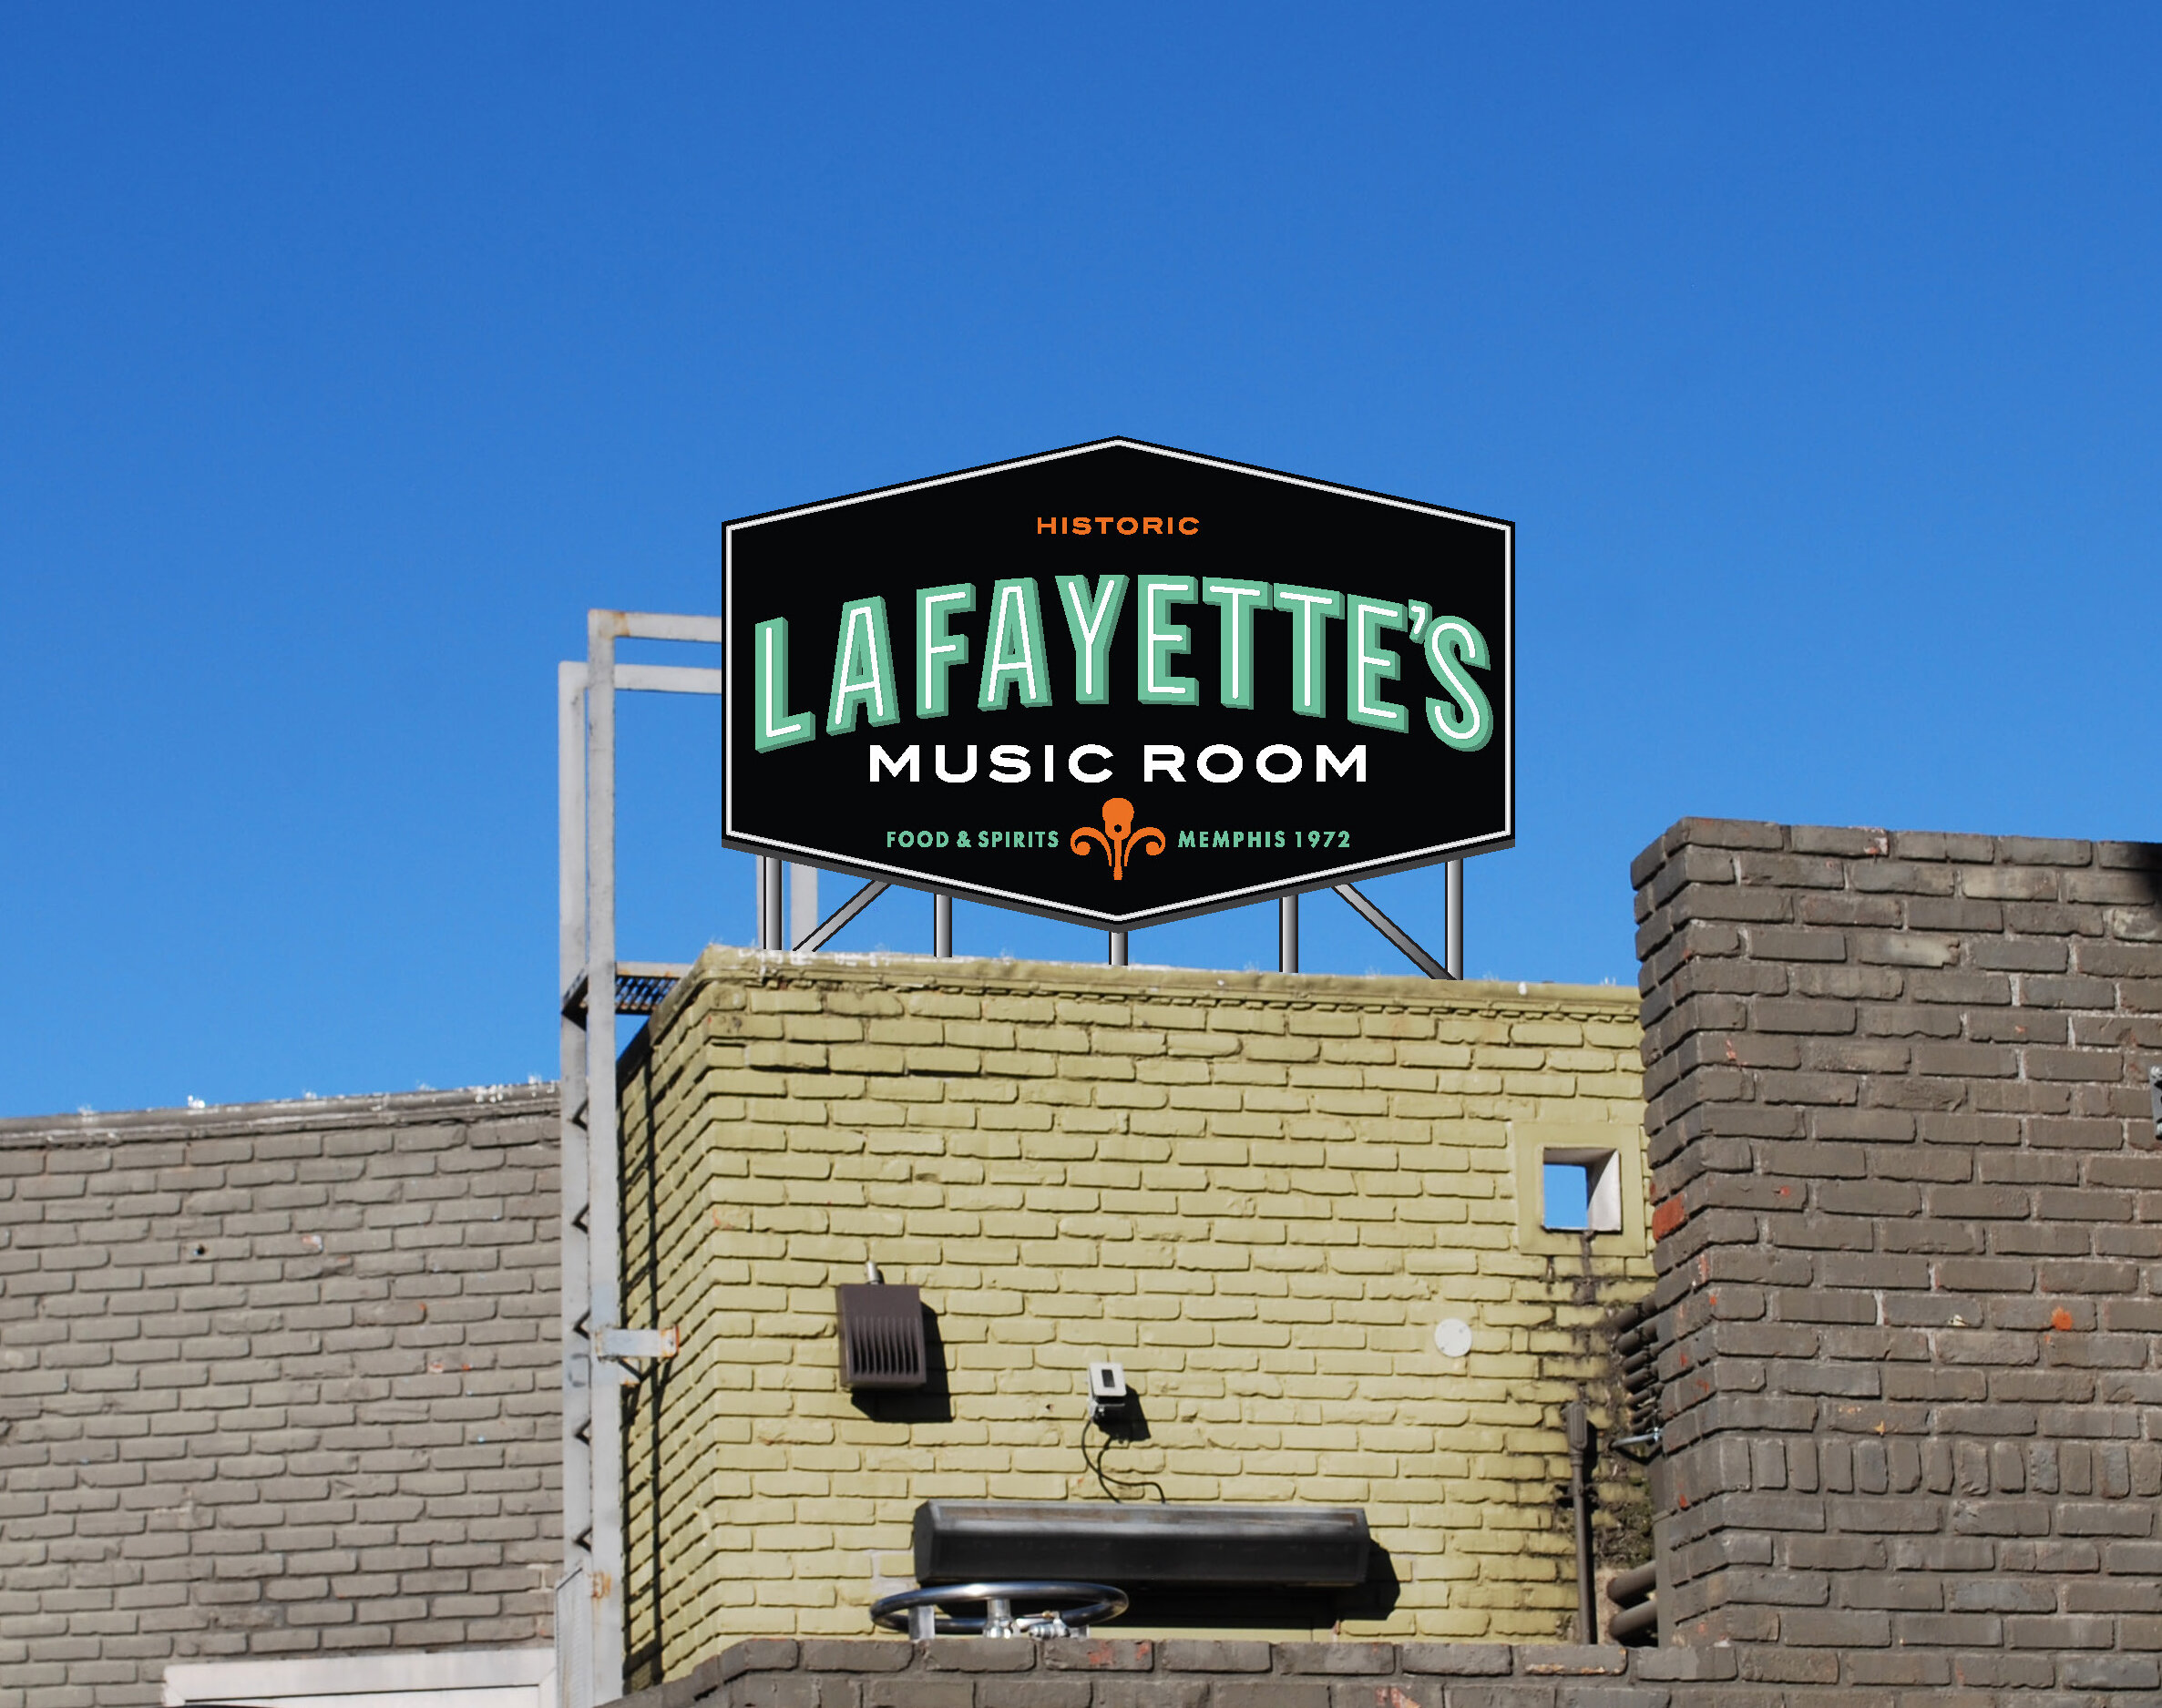  Lafayette’s Music Room  New proposed exterior signage for south elevation  Creative and design by Chuck Mitchell  Overton Square Memphis, Tennessee 